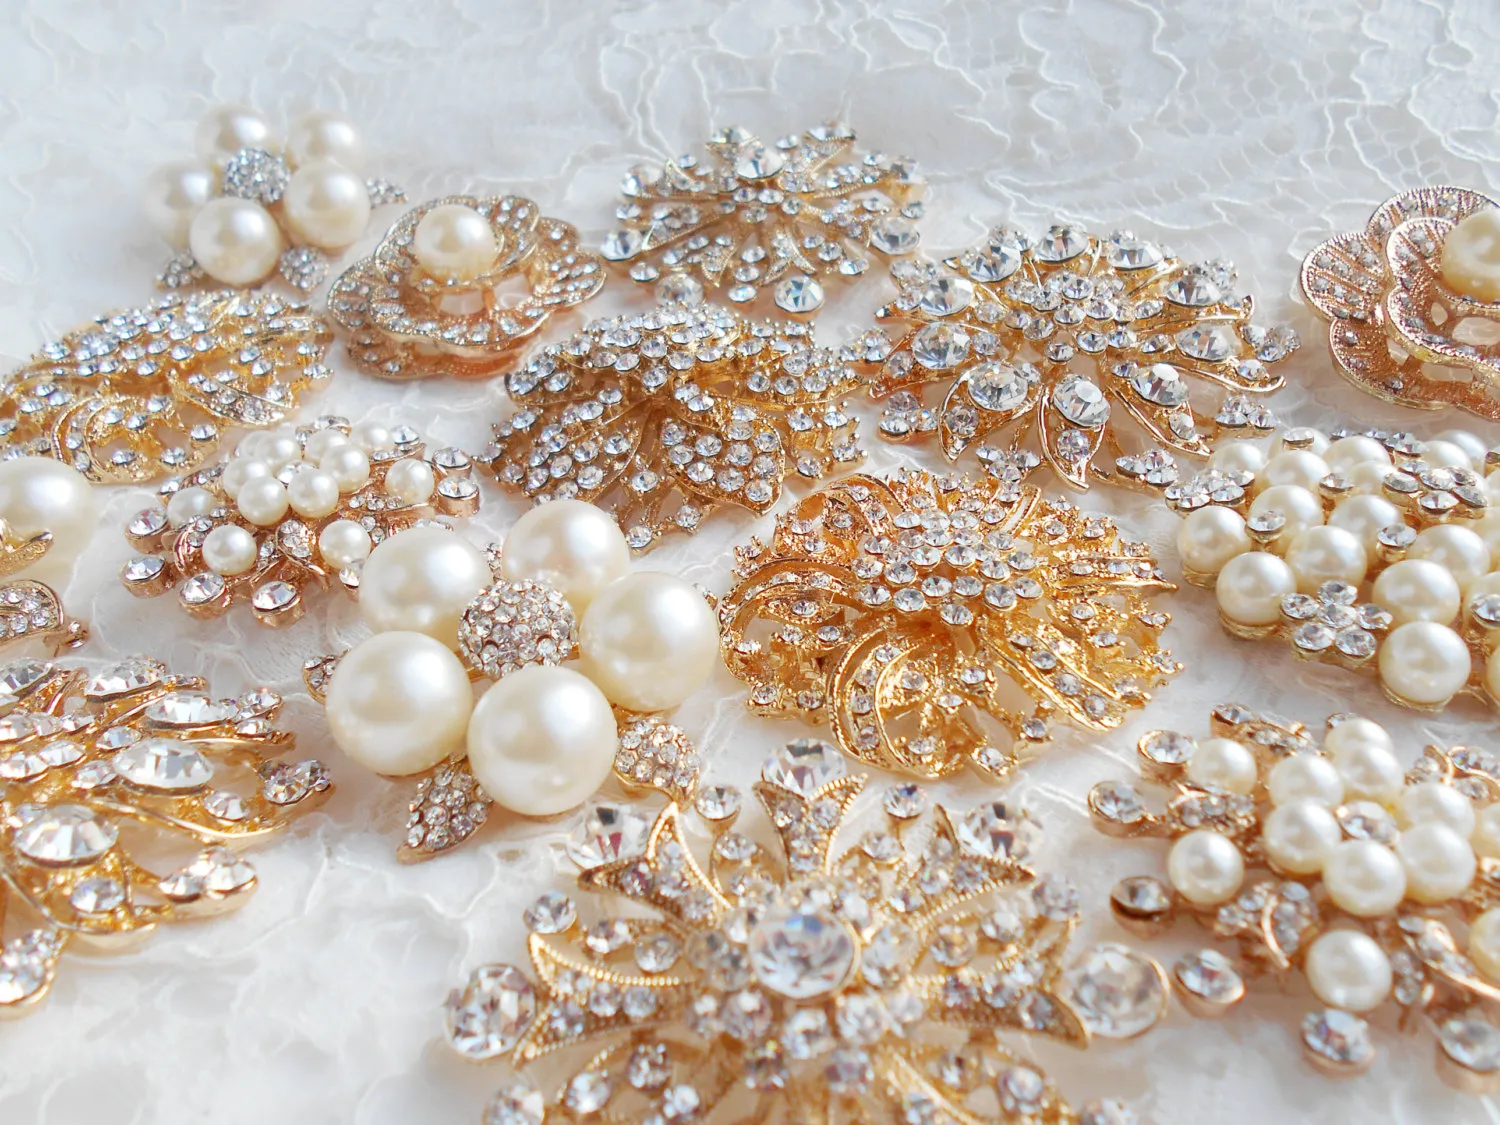 / Gold Tone Clear Rhinestone Crystal and Cream Pearl Party of Wedding Bouquet Broches Bridal Accessoire DIY Broach Huwelijksbenodigdheden